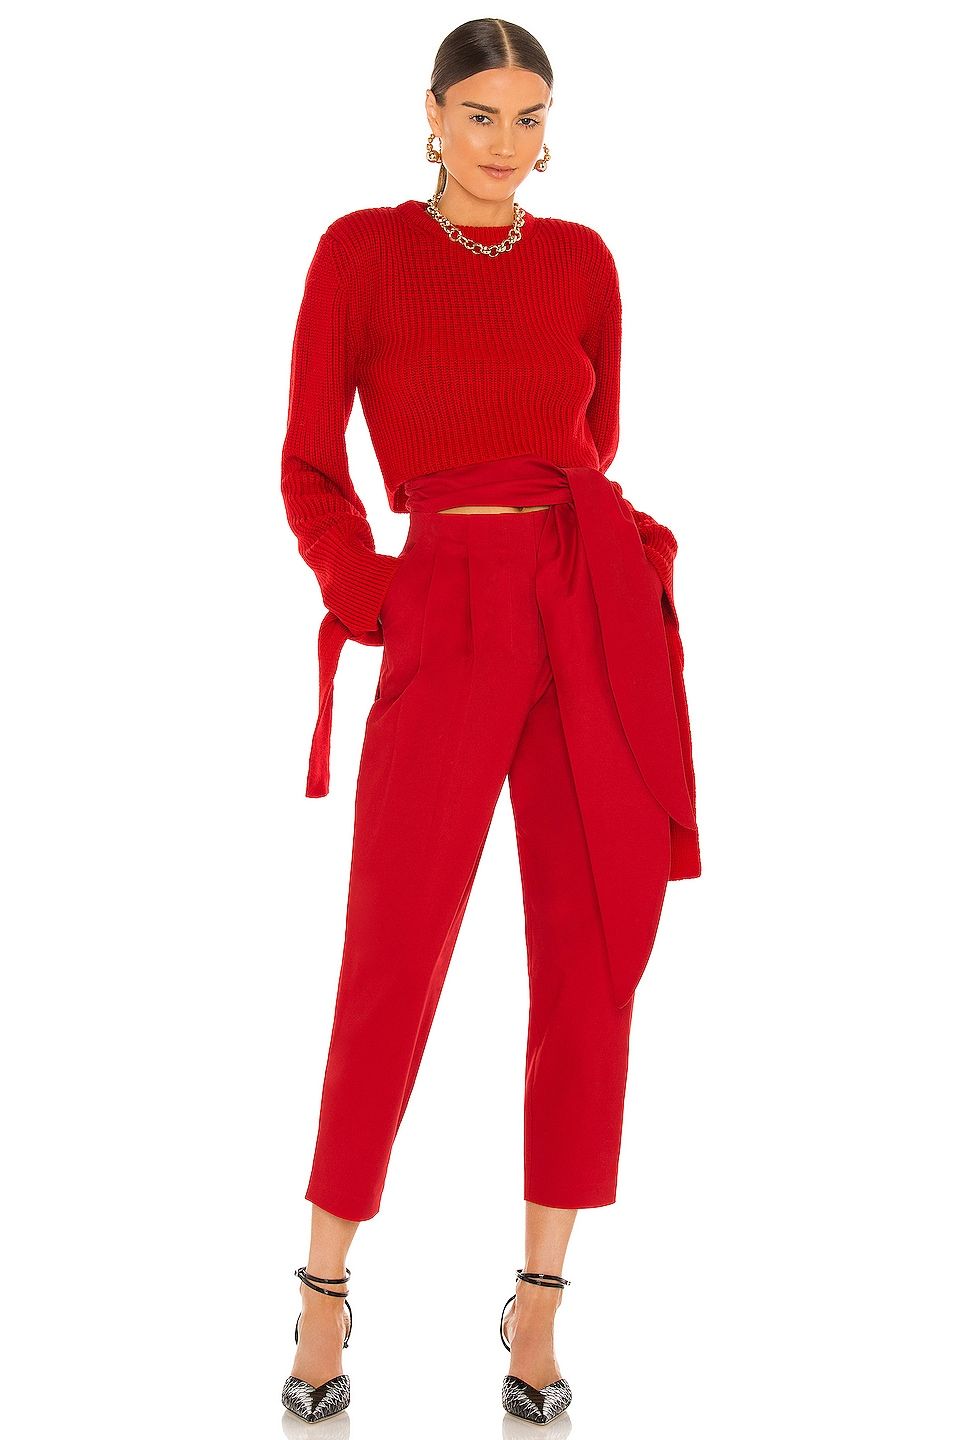 What To Wear With Red Pants: Puzzle Solved